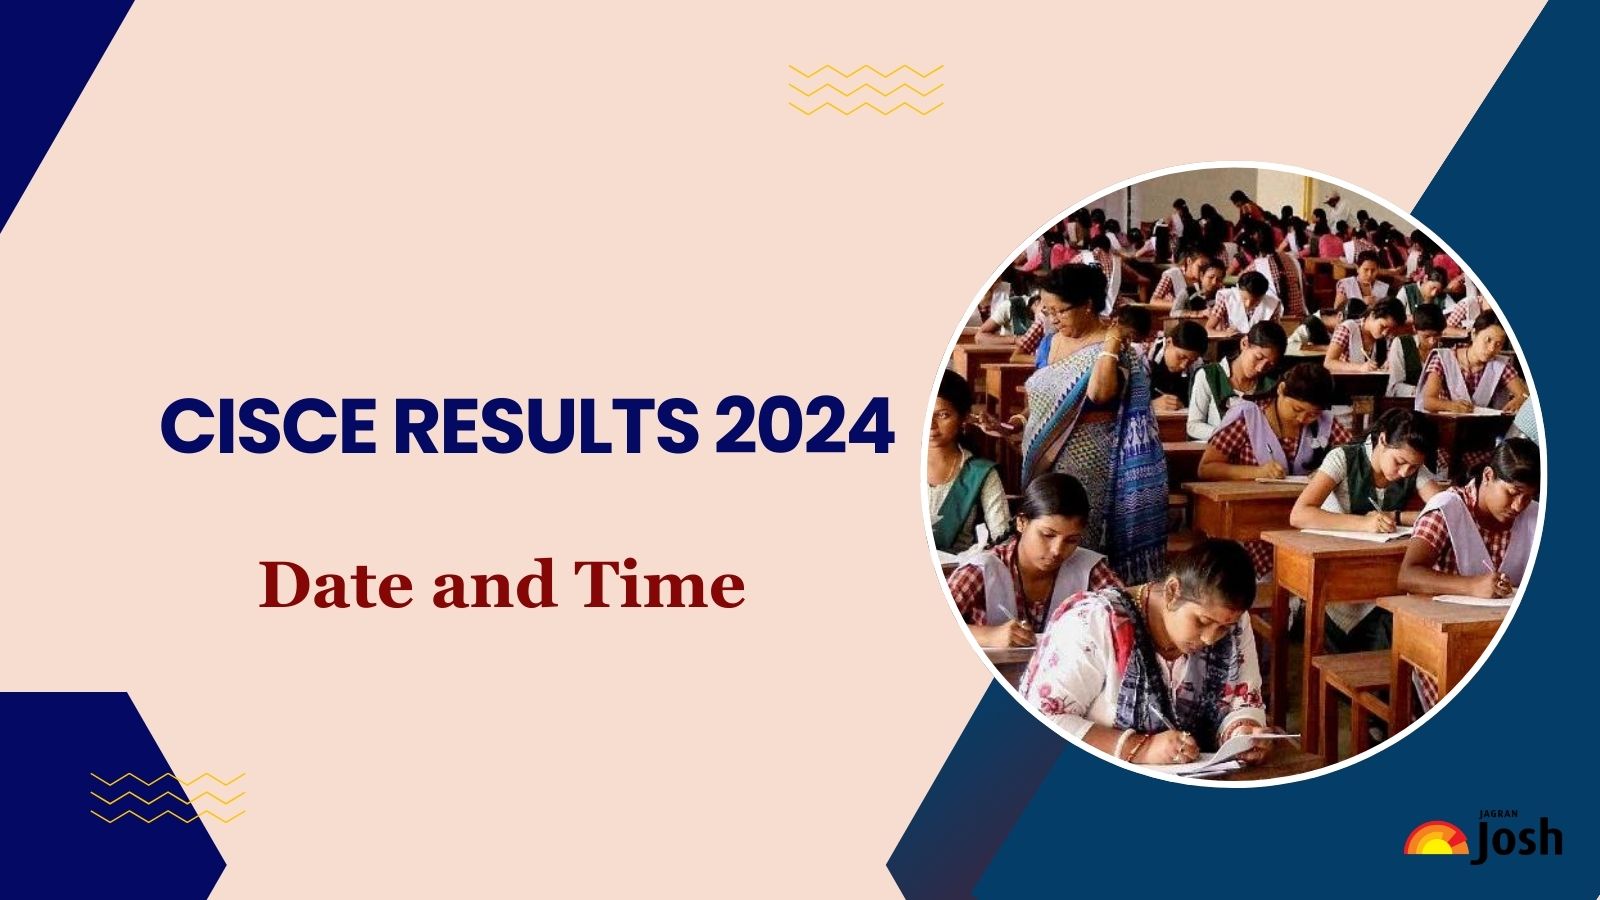 [Official] CISCE Board Results 2024: ICSE 10th, ISC 12th Result Tomorrow at 11 AM results.cisce.org, Check PDF Notice Here!